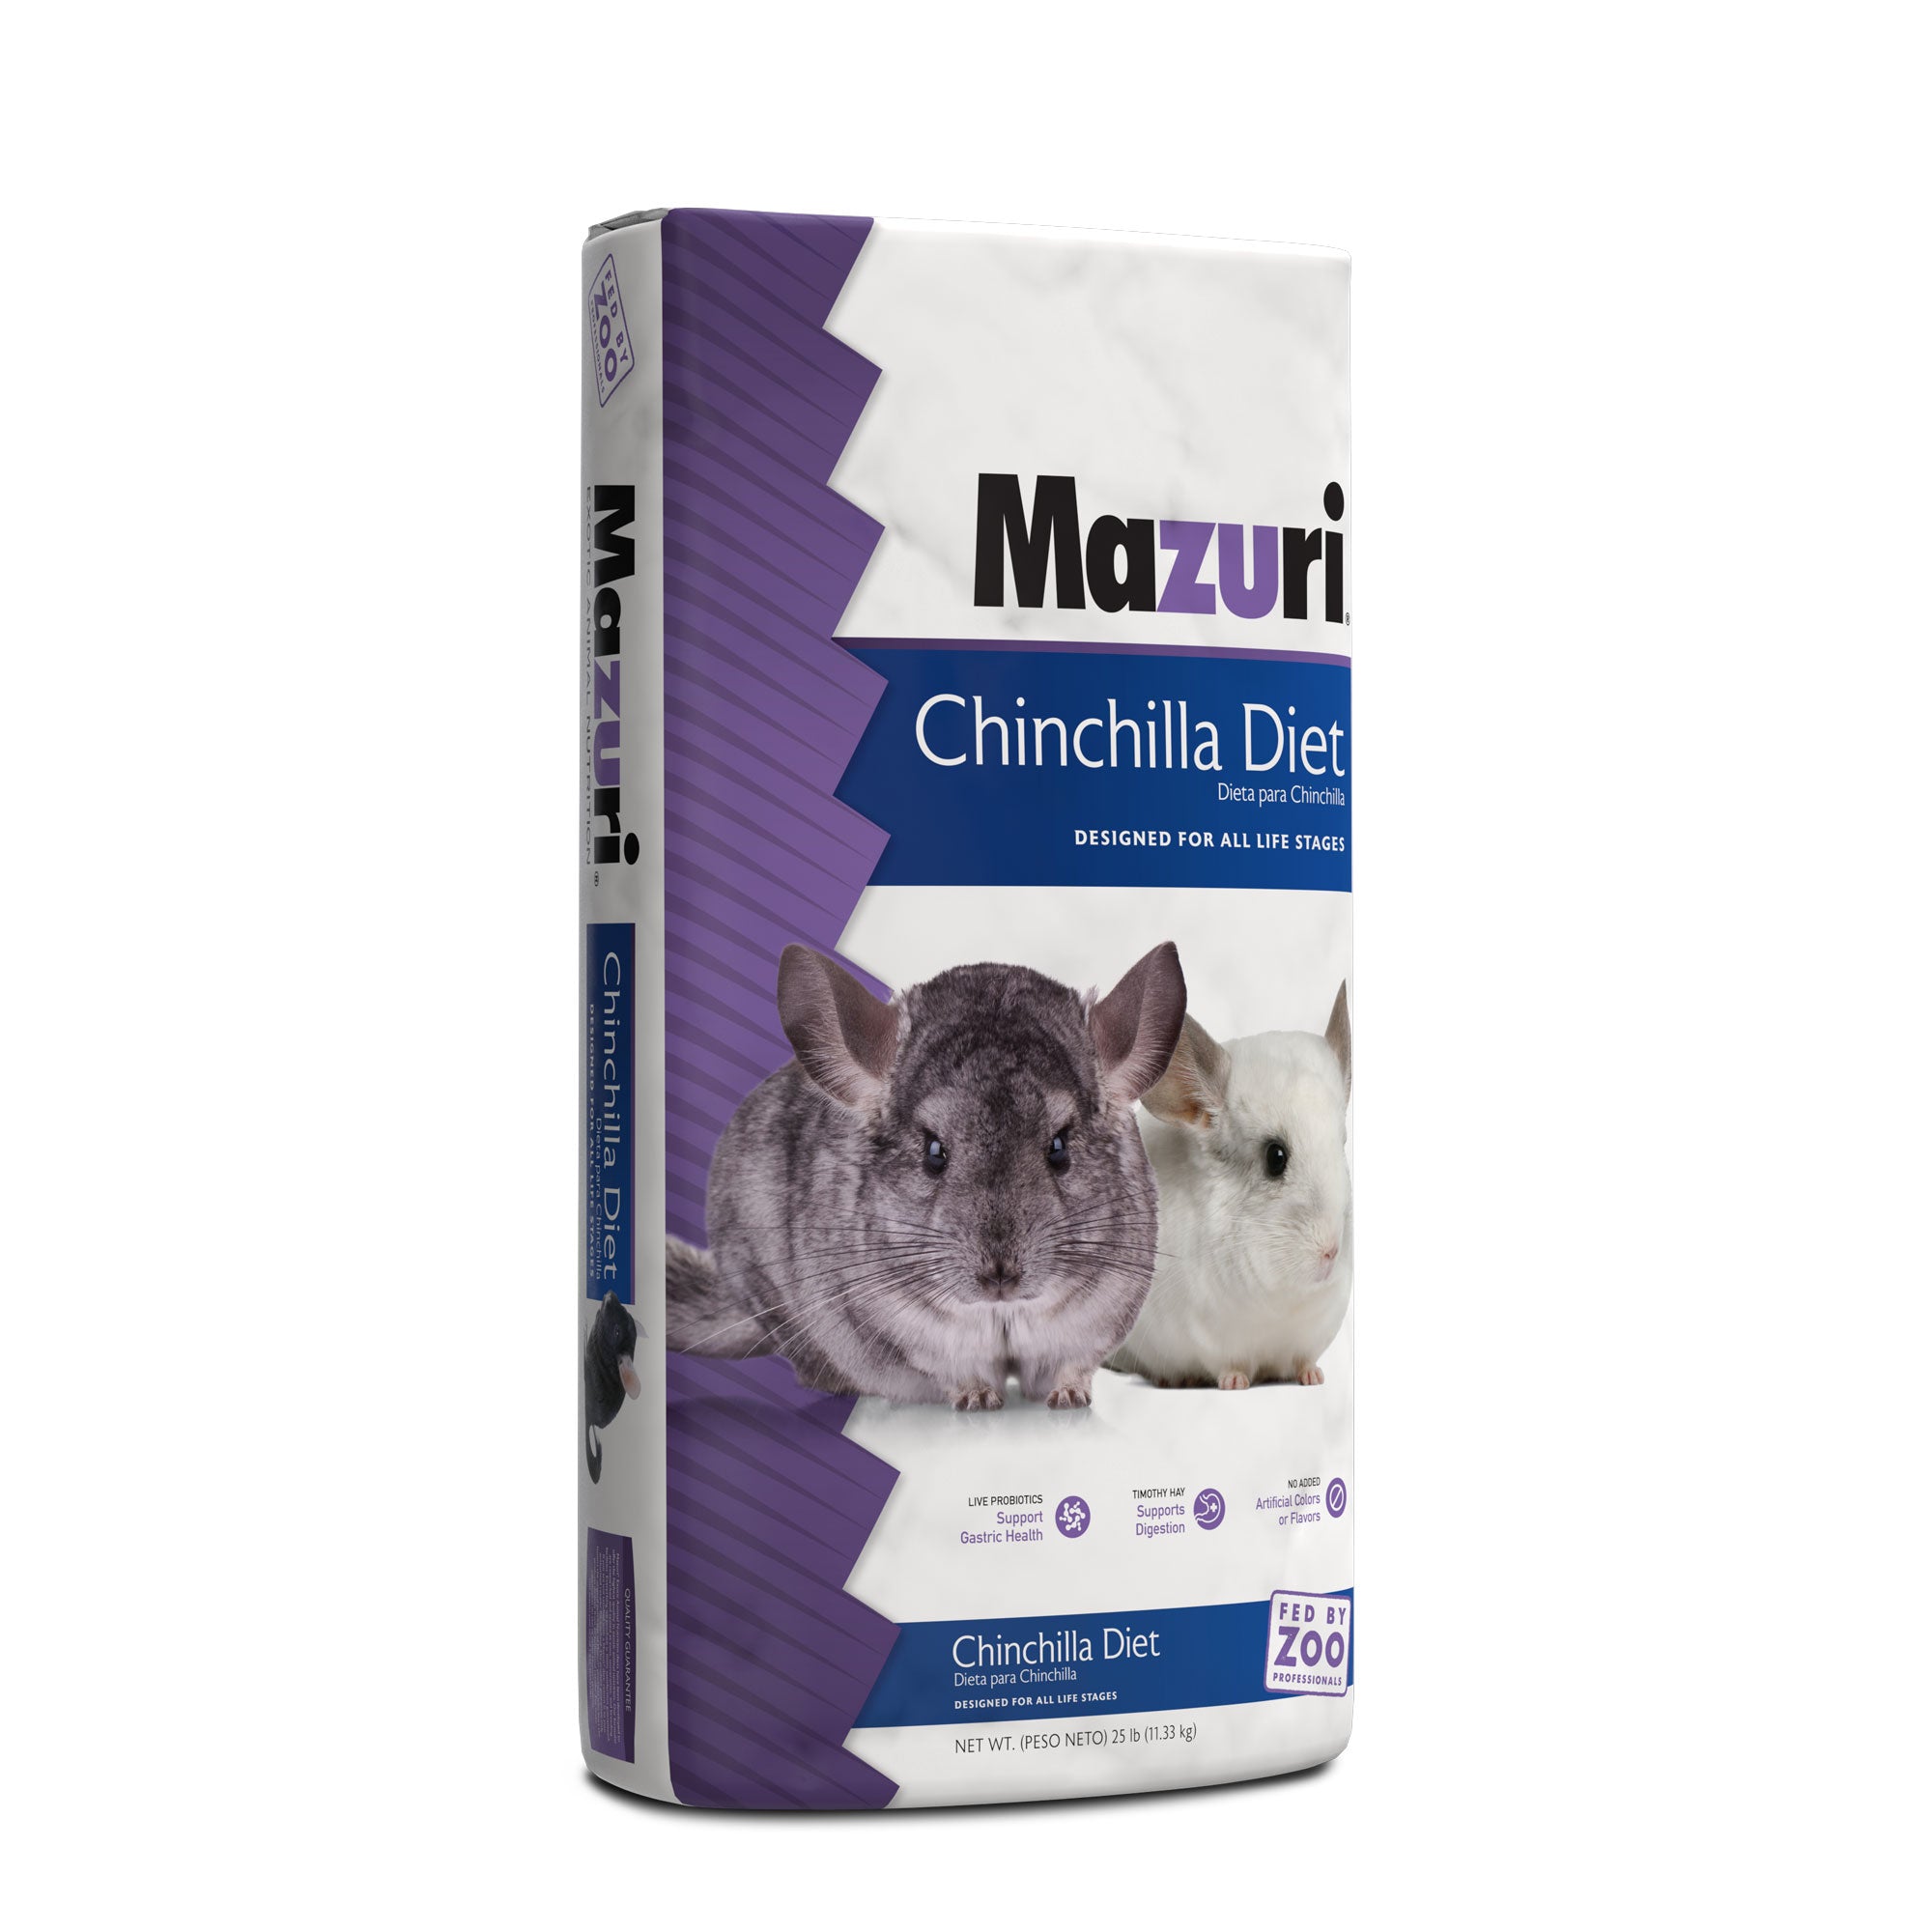 Chinchilla Diet 25 pound bag front and gusset